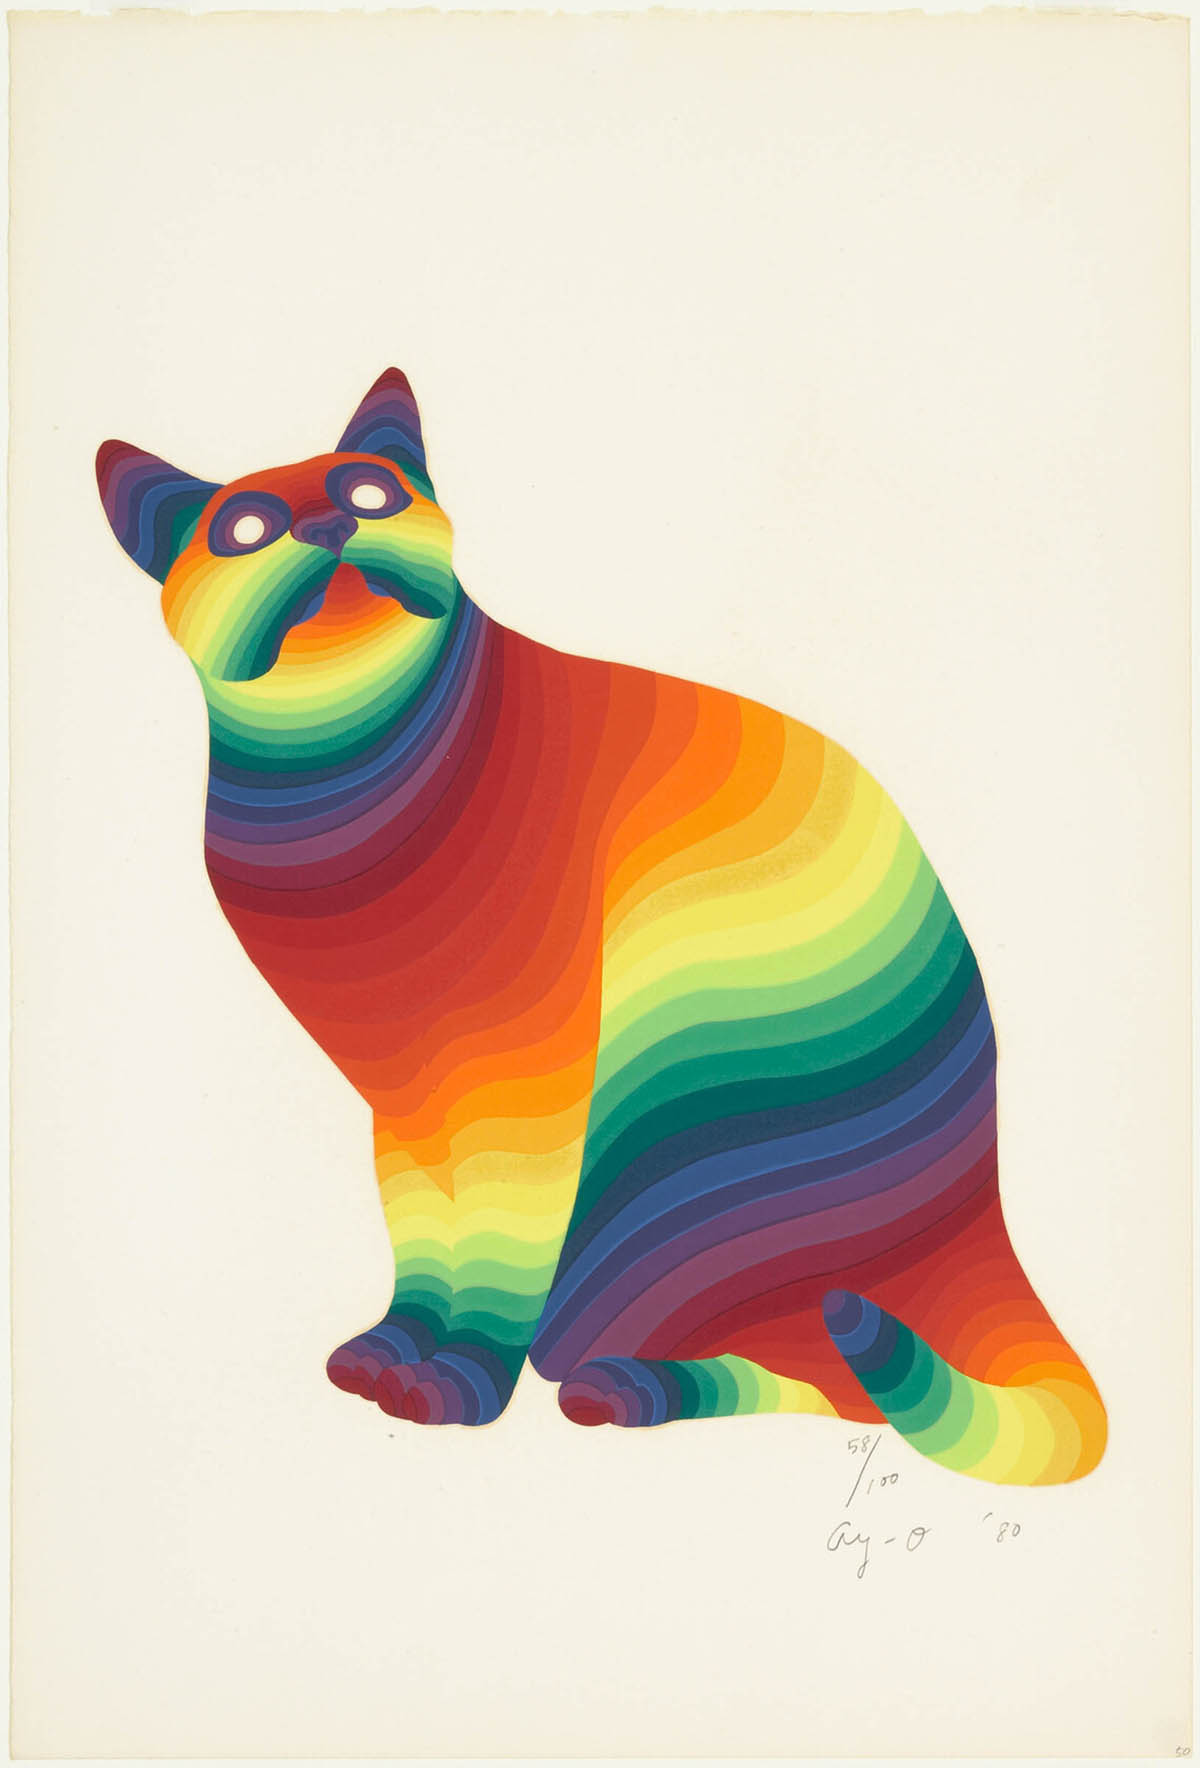 A seated cat looks up at a point just above the viewer. The cat is covered in rainbow-colored stripes and appears against a plain background.